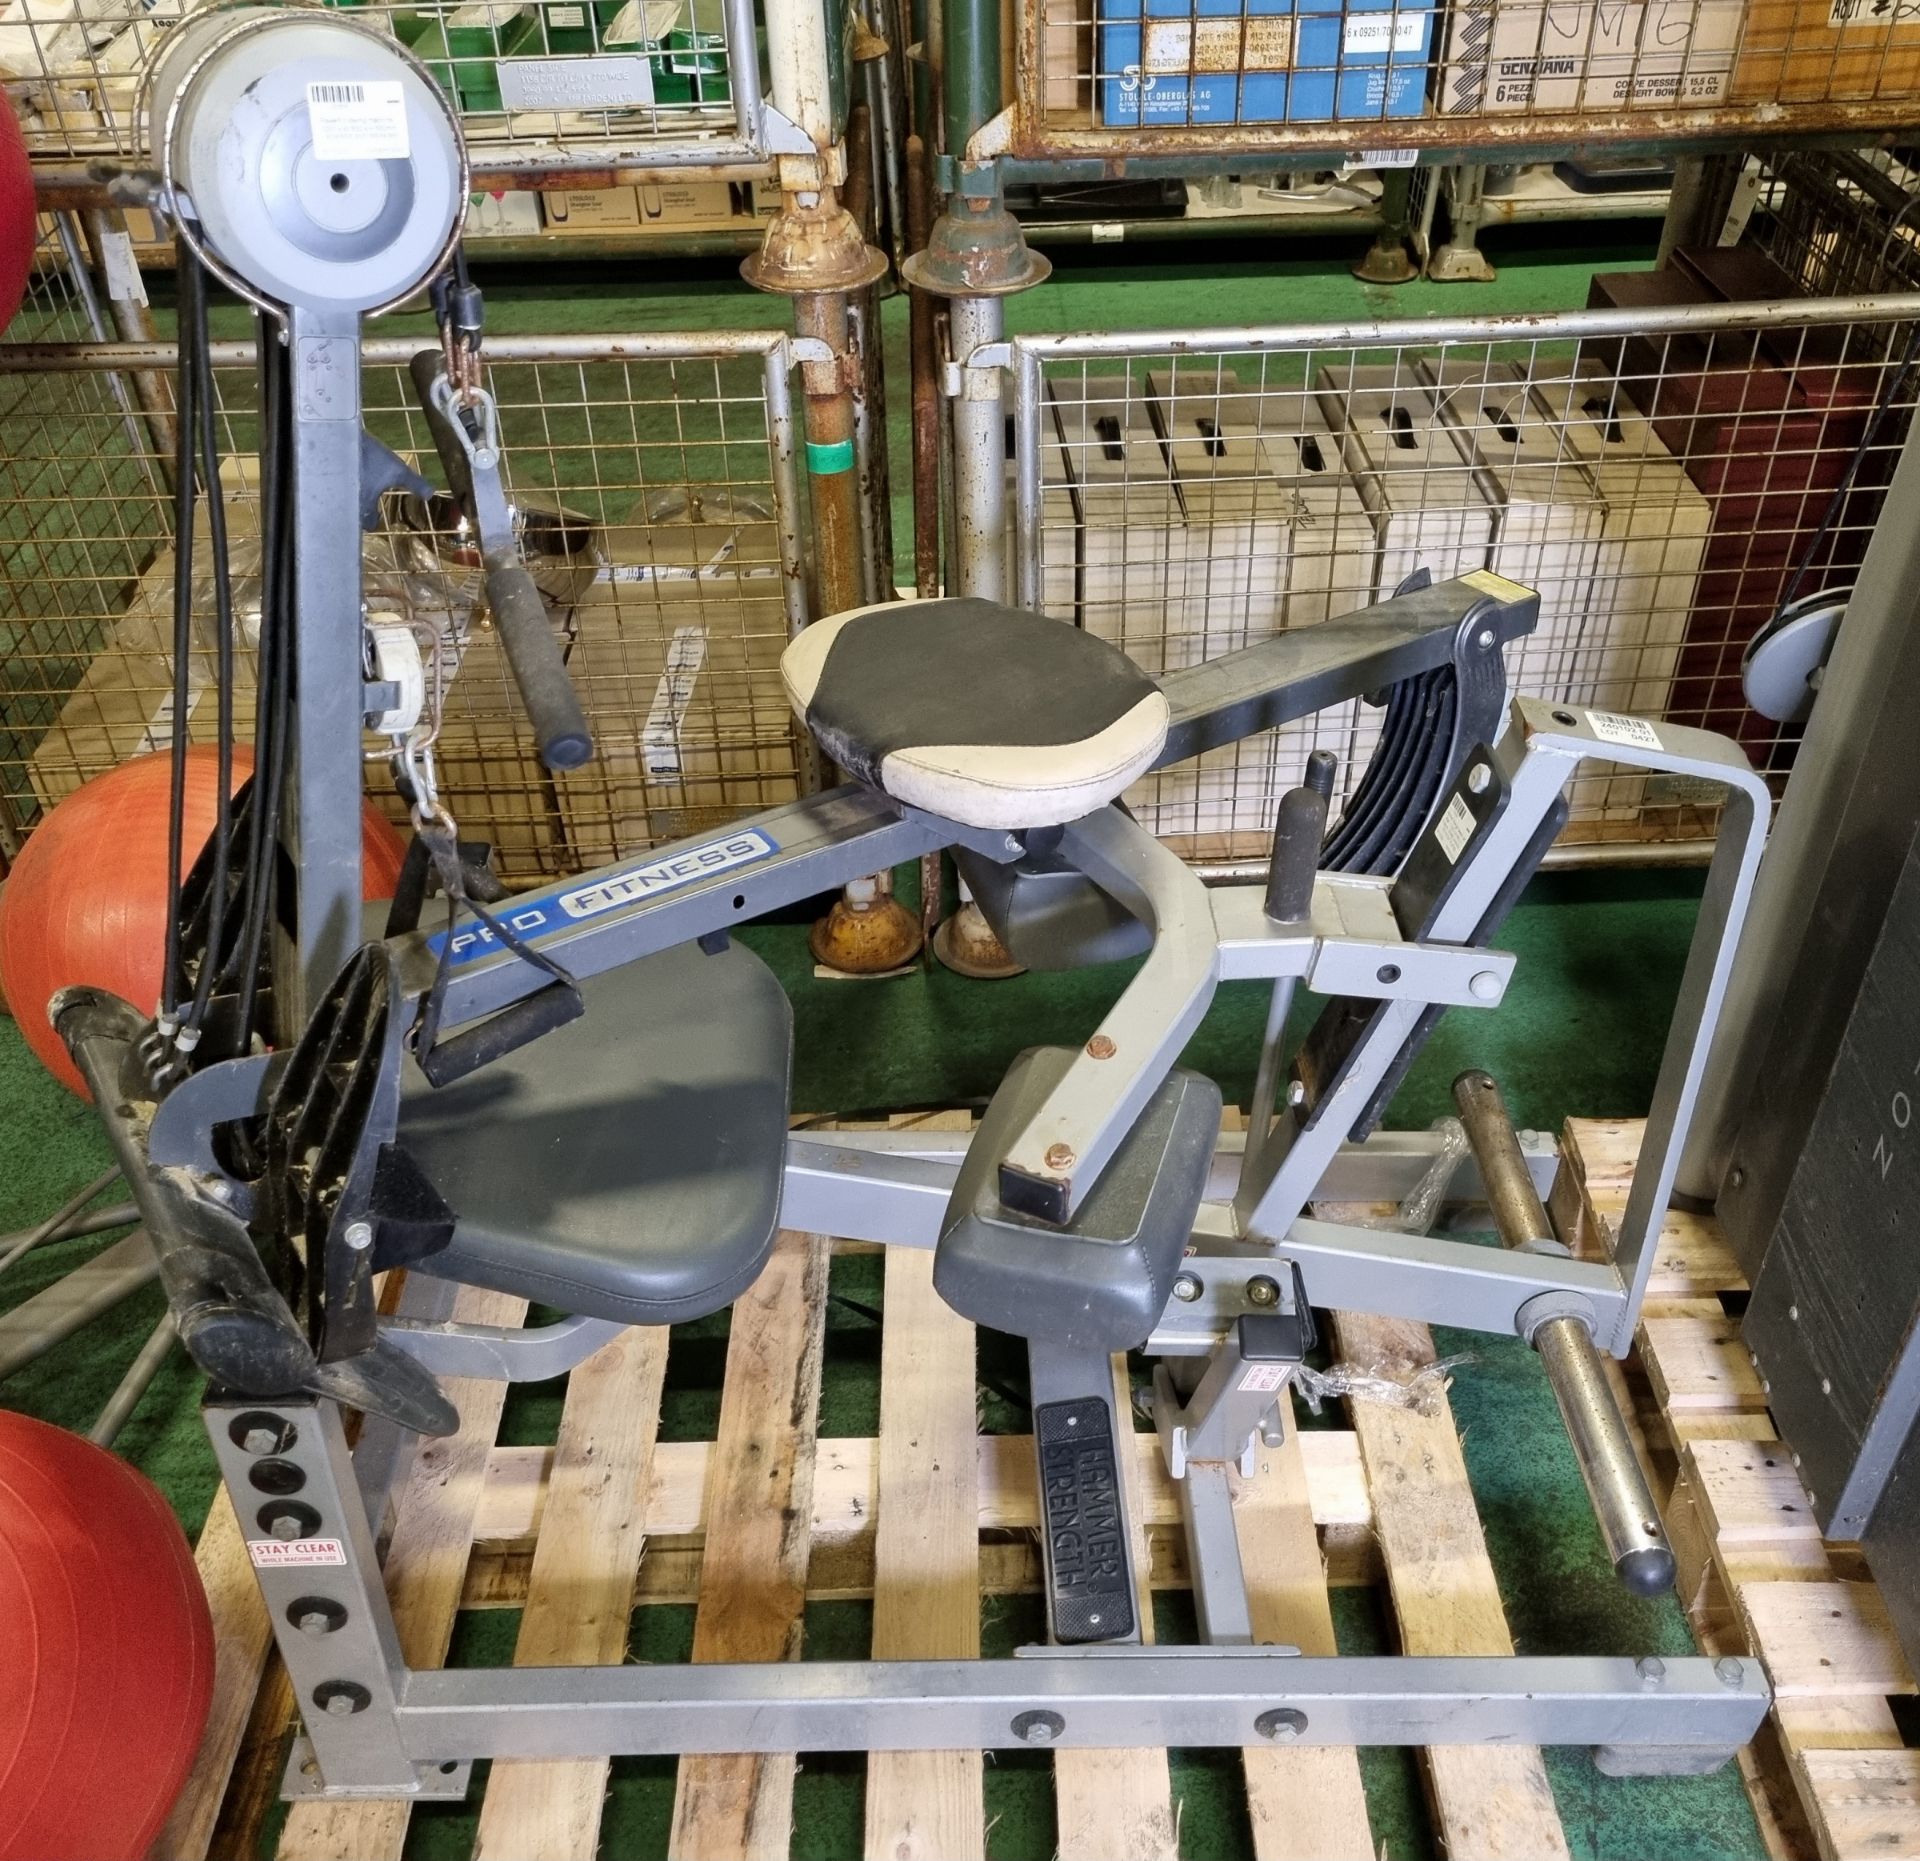 PowerFit rowing machine SPARES AND REPAIRS & Hammer Strength seated calf raise - see desc. - Image 2 of 7